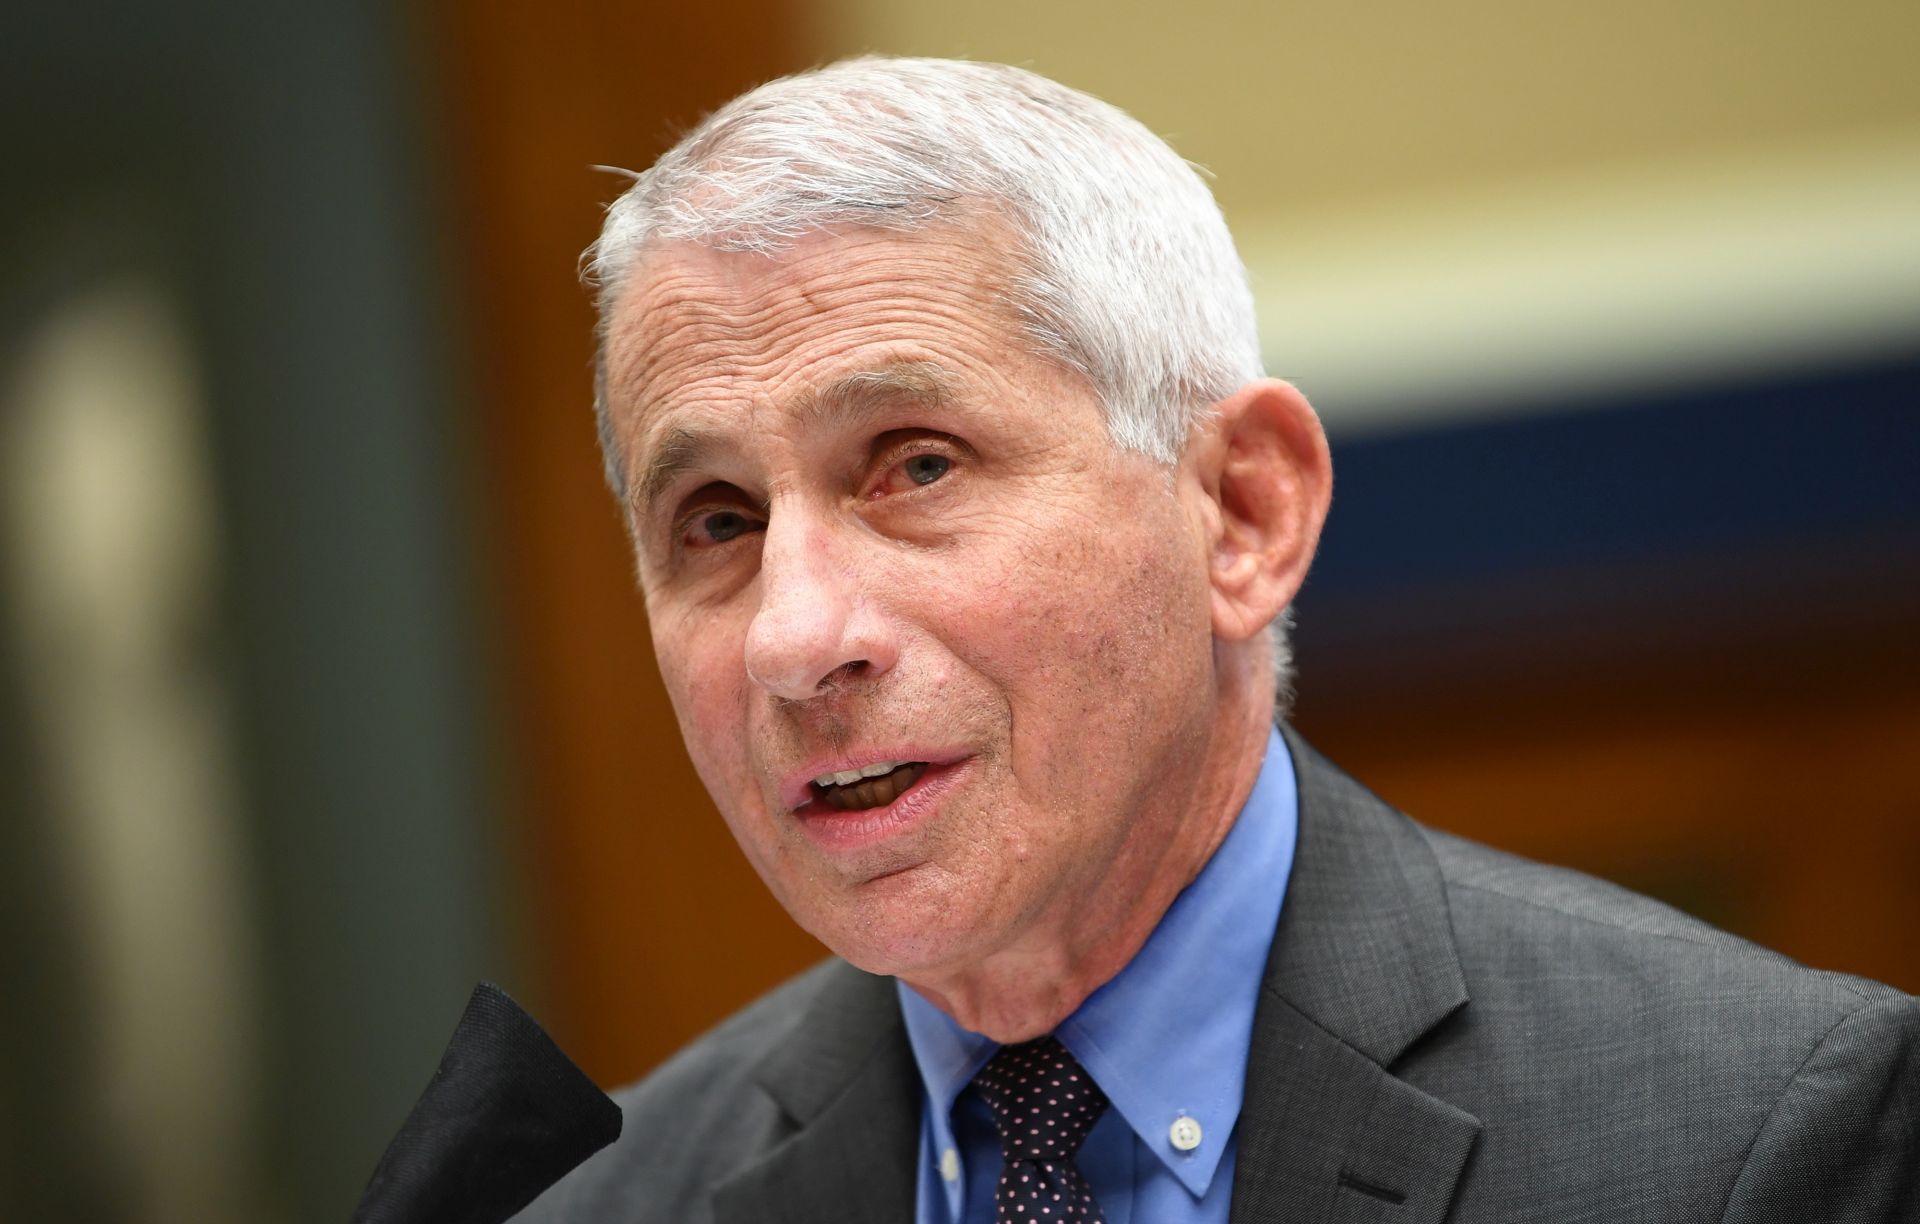 epa08504135 Director of the National Institute for Allergy and Infectious Diseases Dr. Anthony Fauci testifies before the House Committee on Energy and Commerce on the Trump Administration's Response to the COVID-19 Pandemic, on Capitol Hill in Washington, DC, USA, 23 June 2020.  EPA/KEVIN DIETSCH / POOL